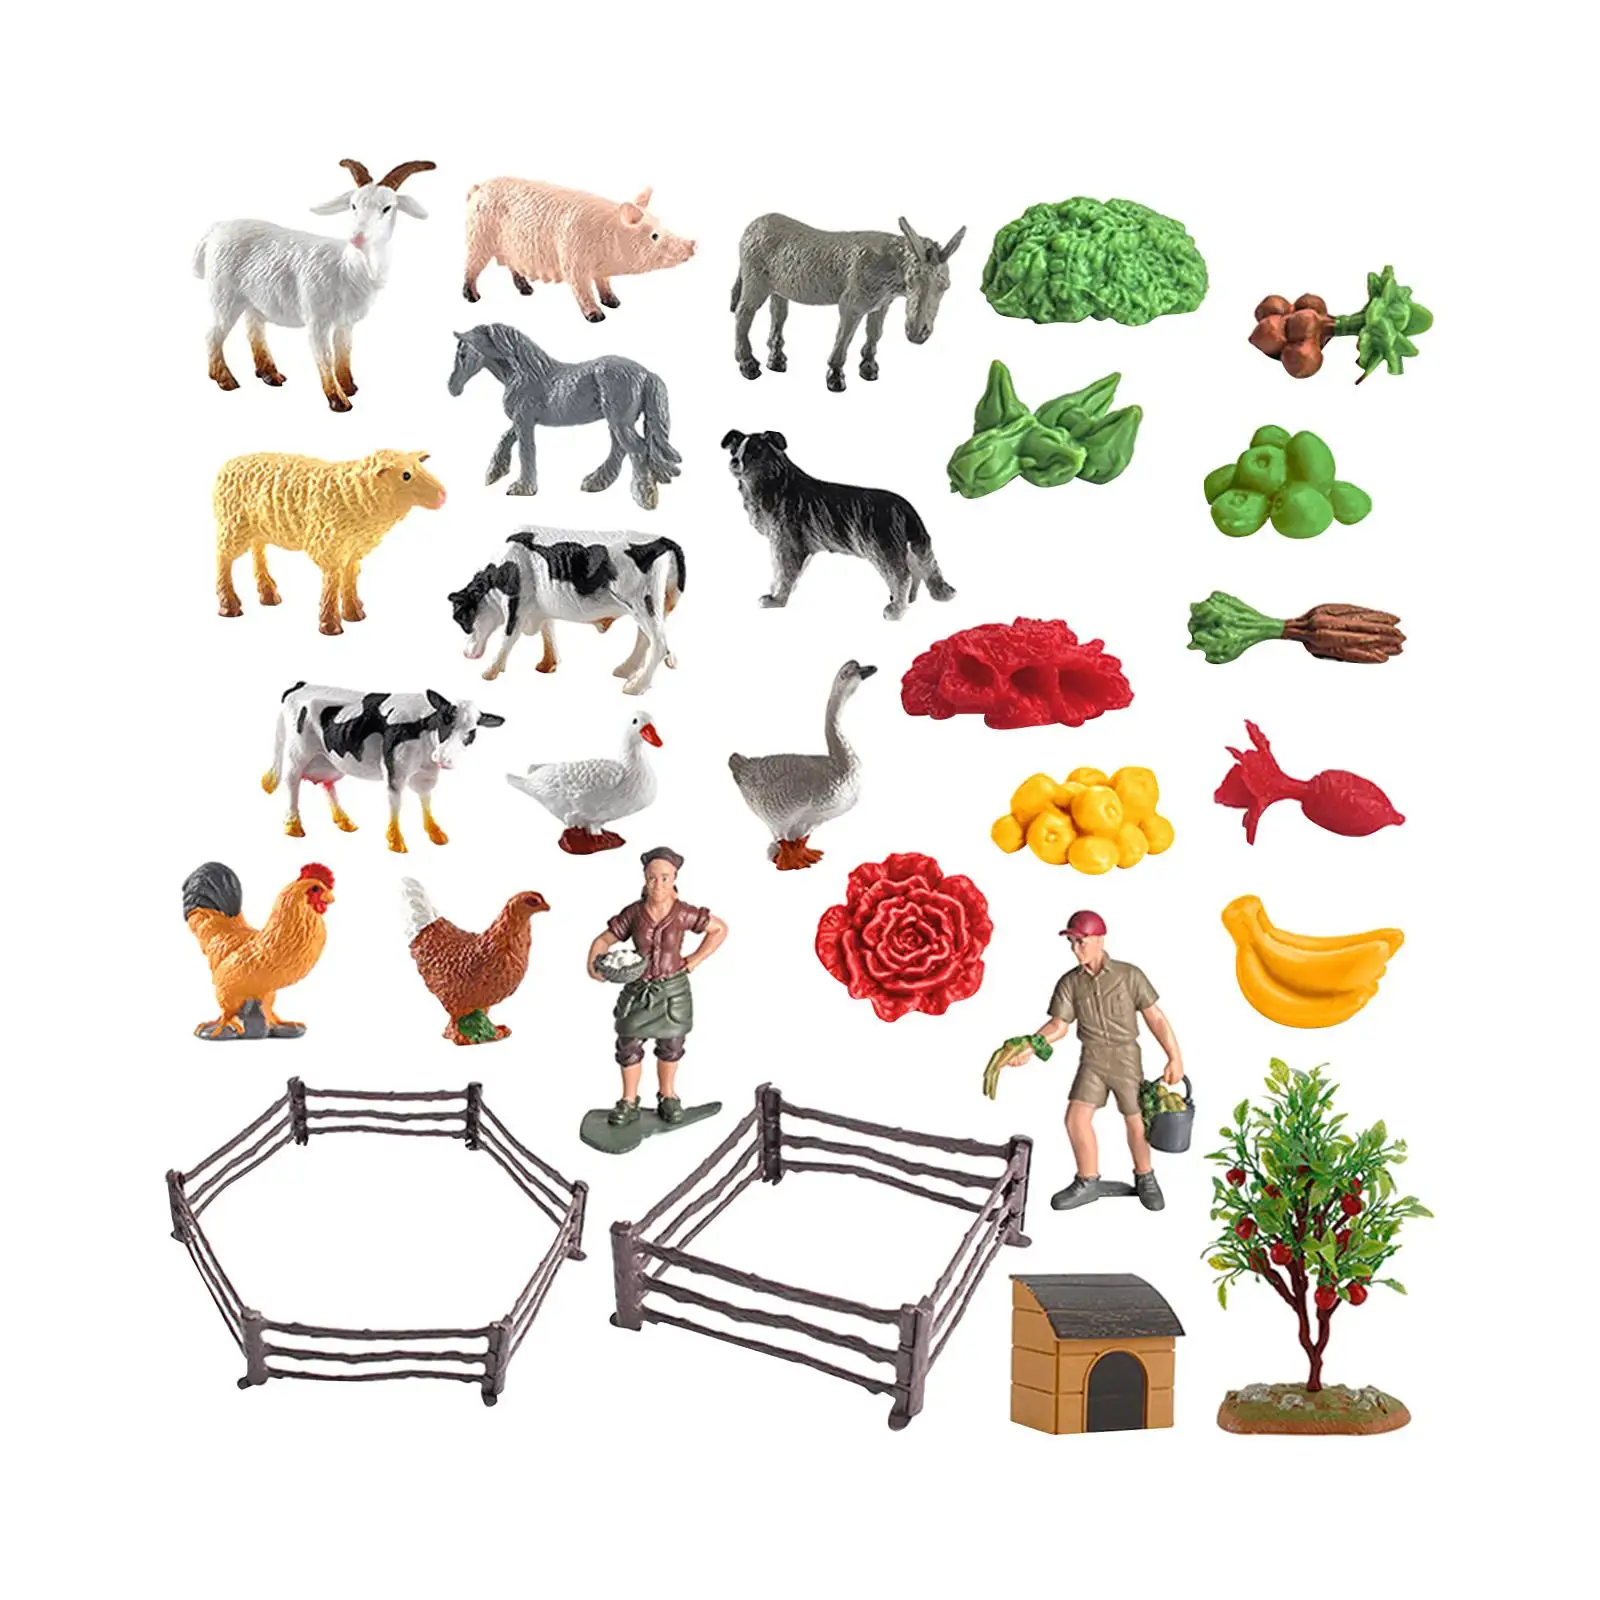 36 Pieces Sand Table Farm Scene Playset Ornaments Farms ranch Accessories Animals Figures Supplies Statue for Micro Landscape